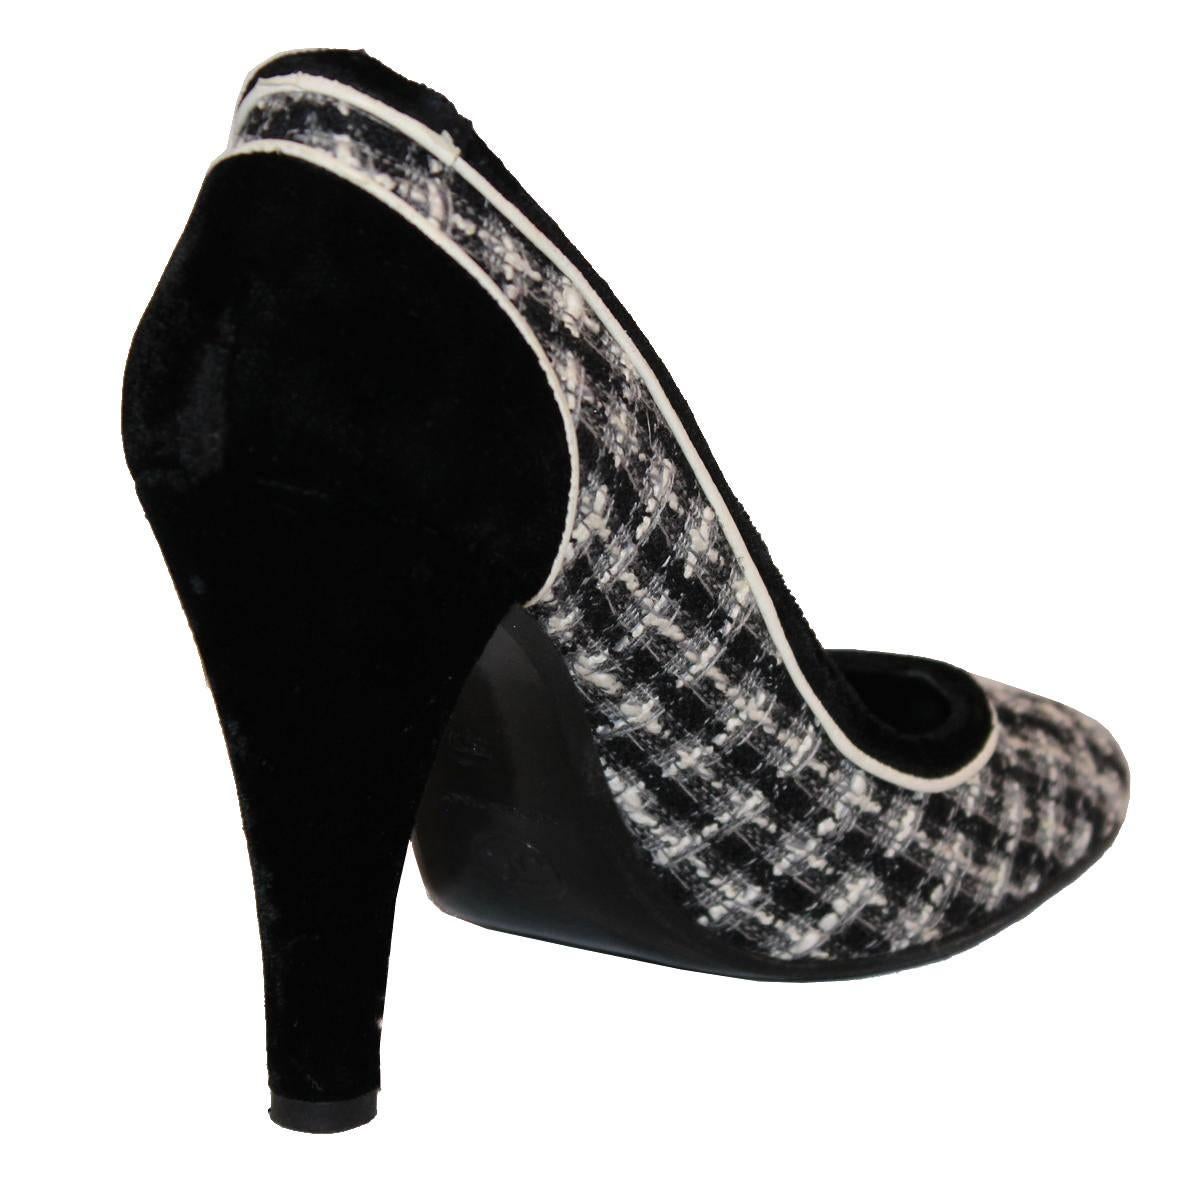 Beautiful and iconic Chanel décolleté
White, grey and black tweed
Bouclé
Black velvet heel and profile
Heel height cm 10 (3.93 inches)
With box
Made in Italy
Worldwide express shipping included in the price !